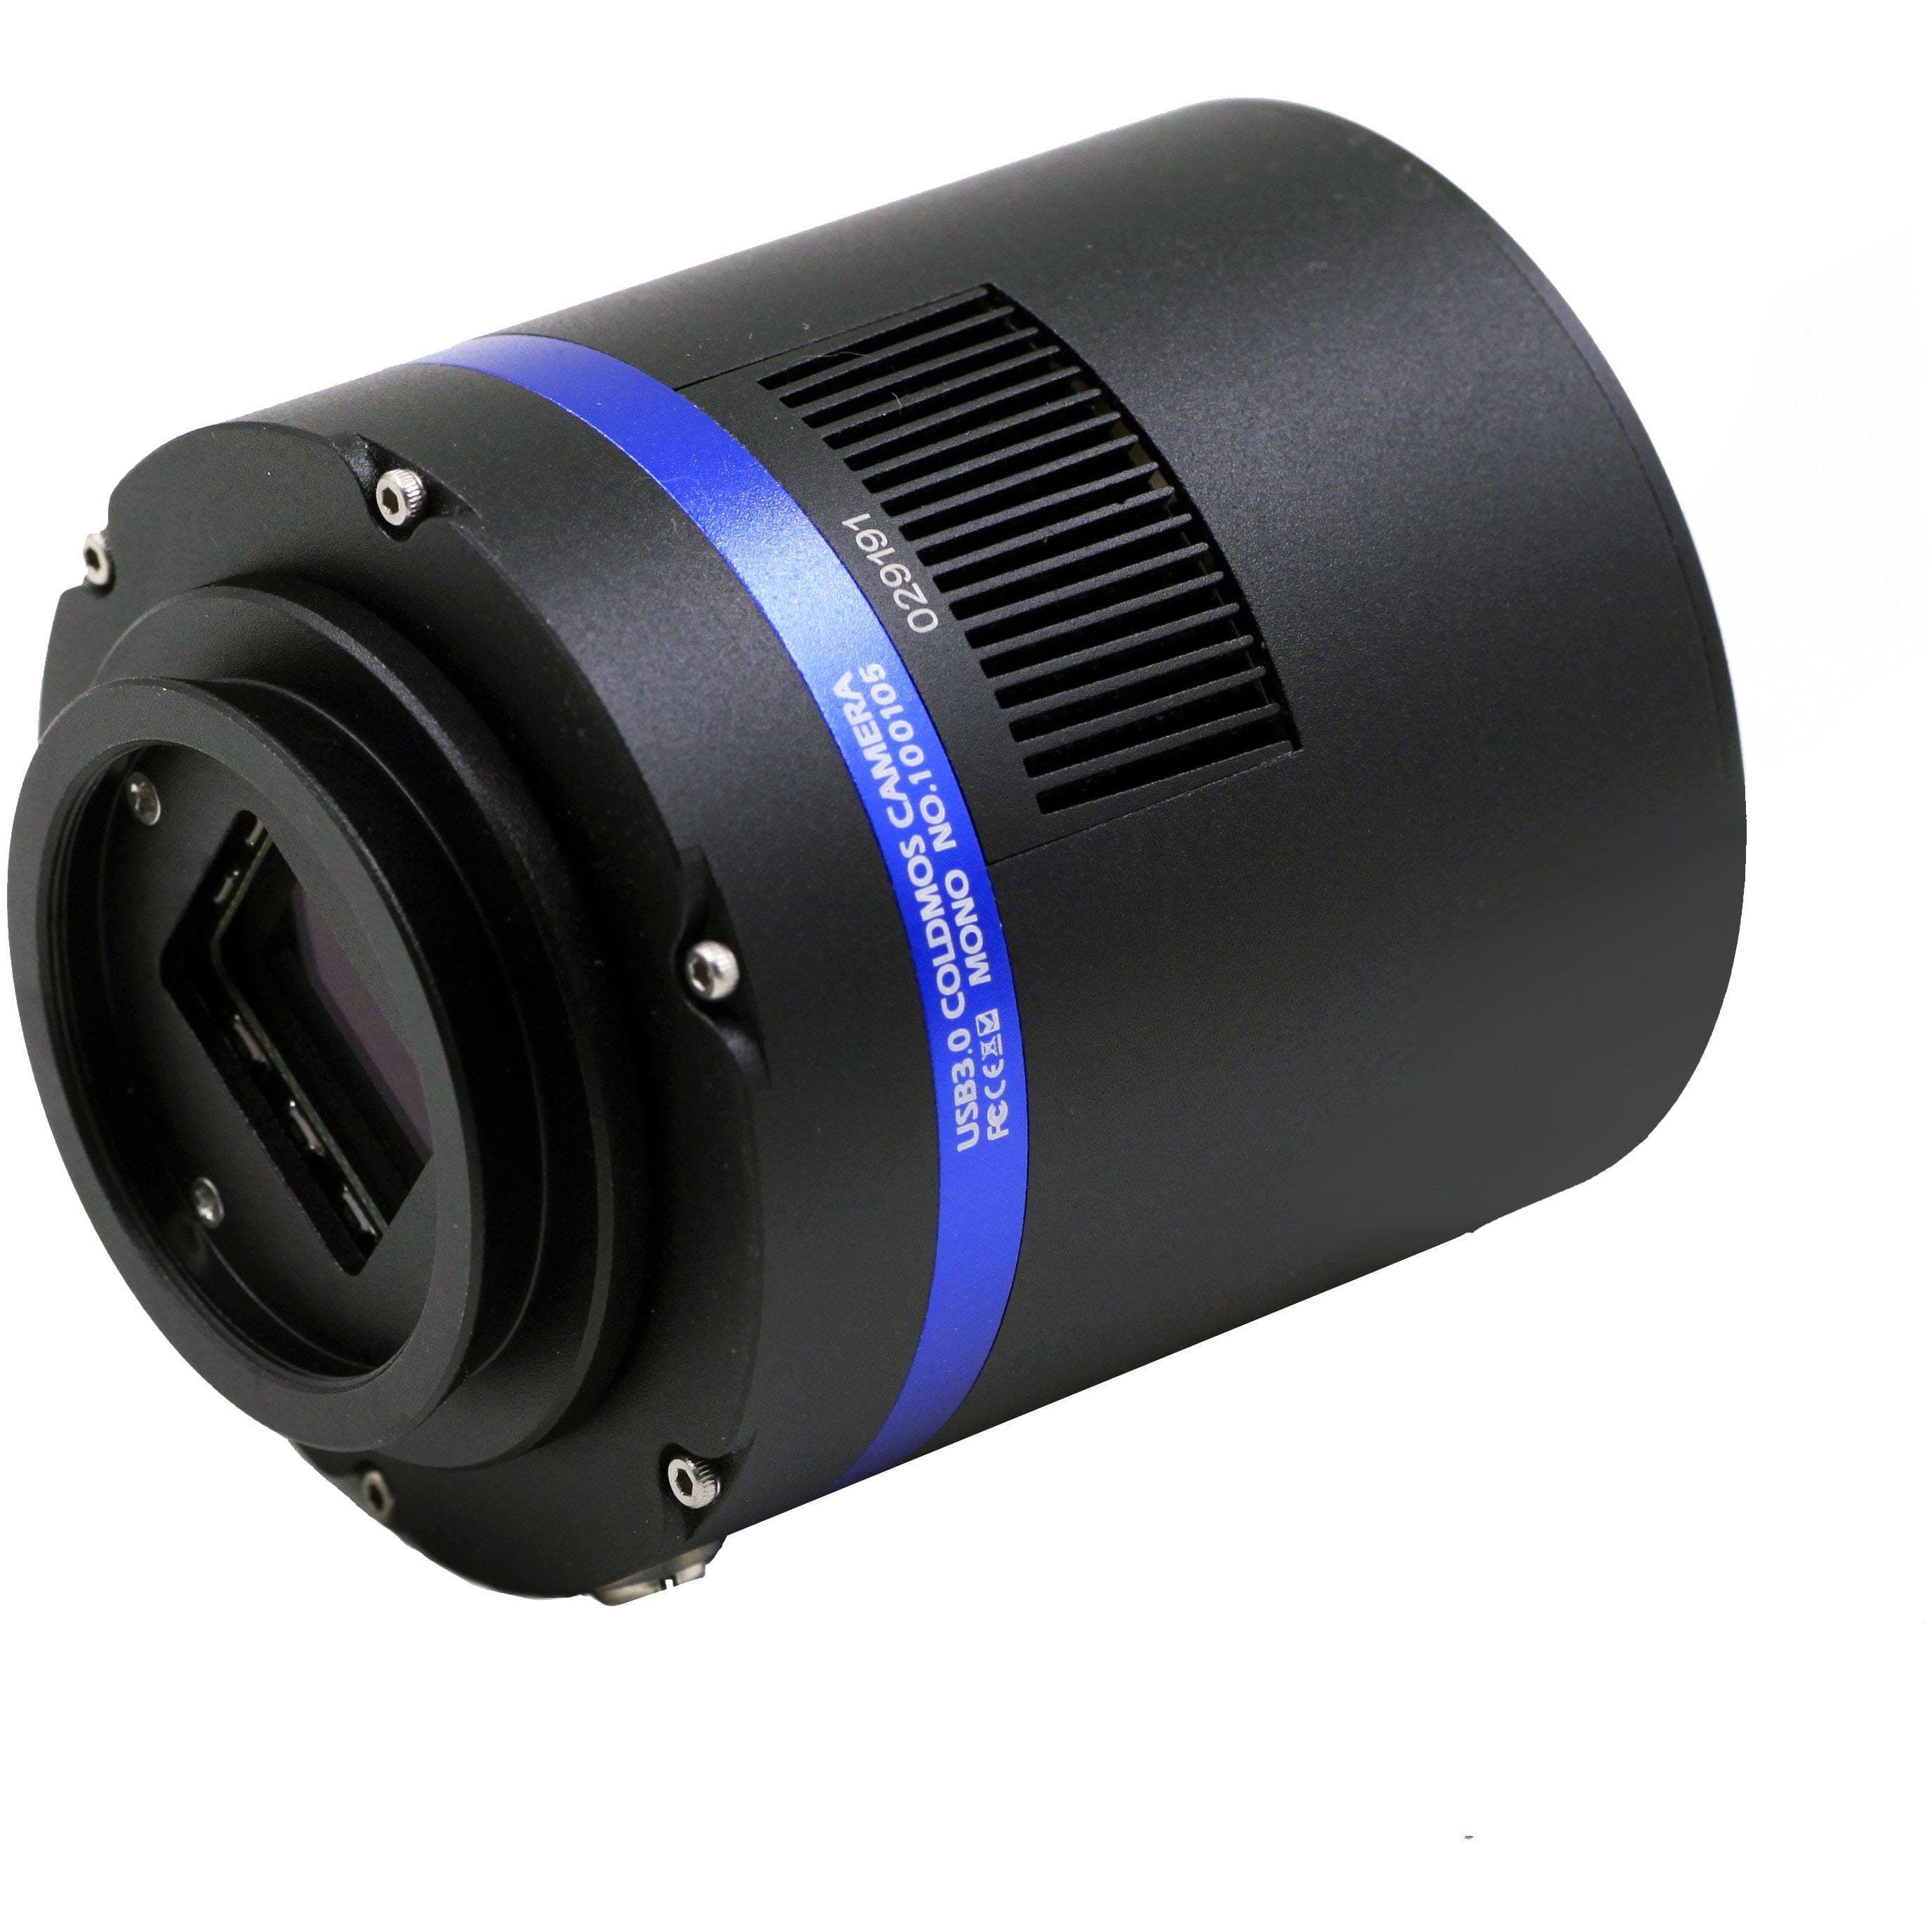 QHYCCD Camera QHYCCD QHY183C Cooled Color CMOS Telescope Astrophotography Camera